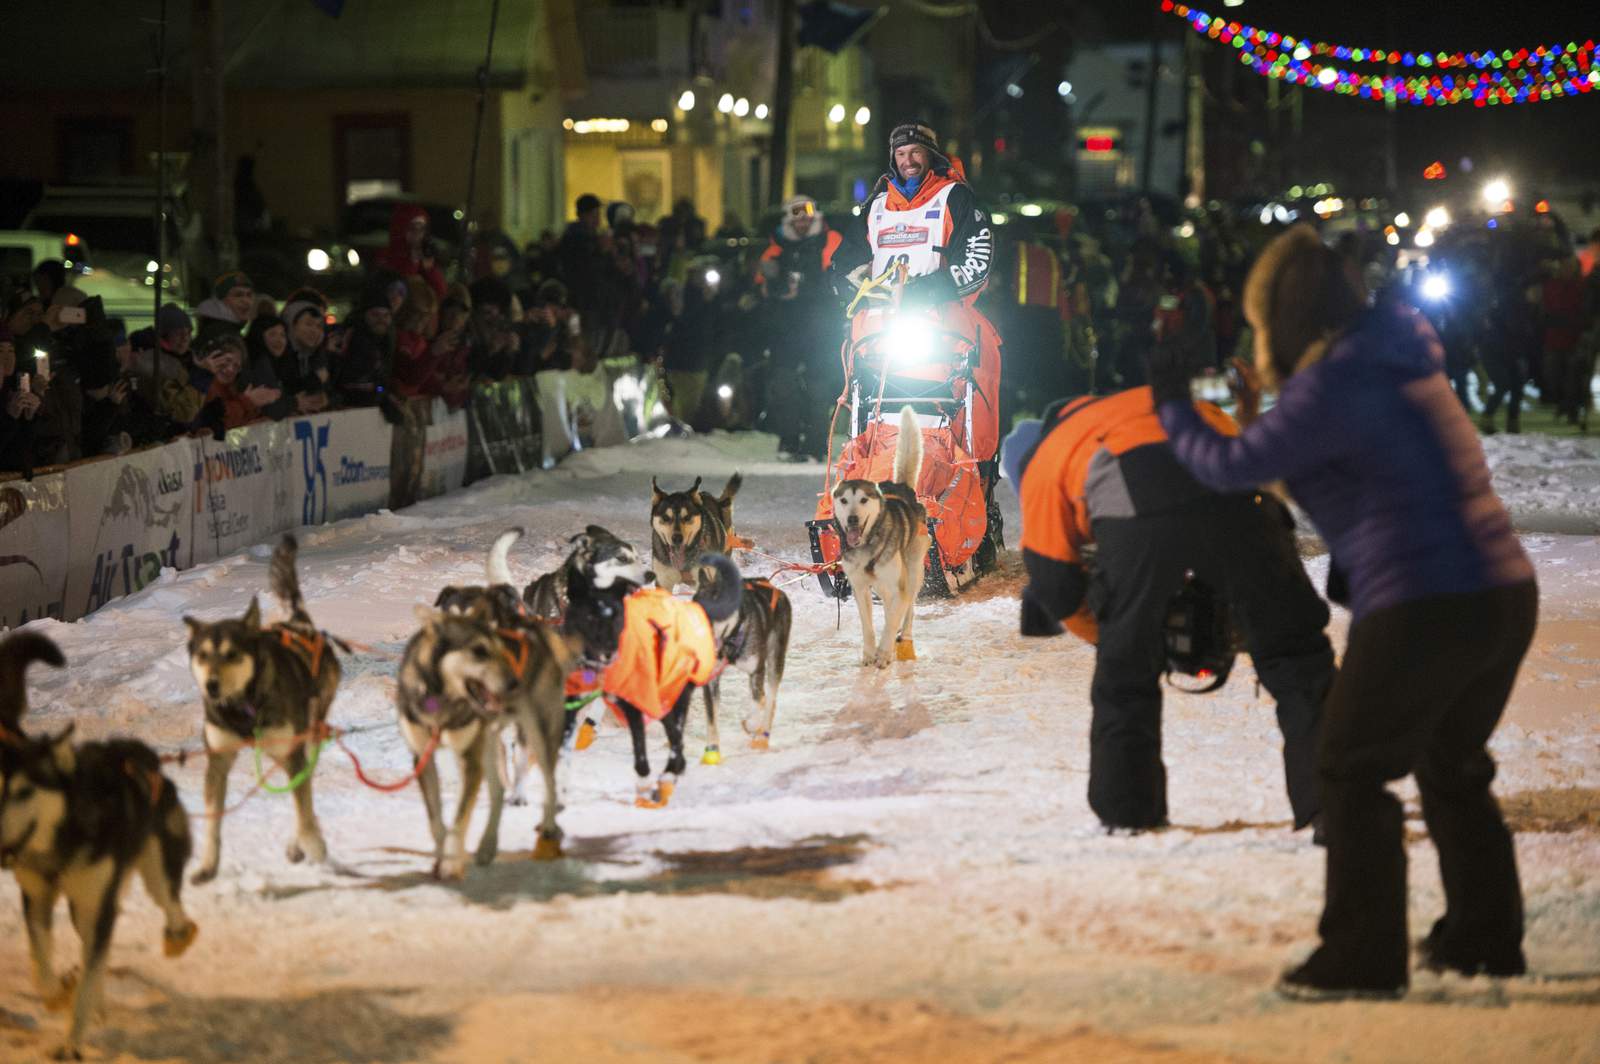 2021 Iditarod race in Alaska to be about 140 miles shorter